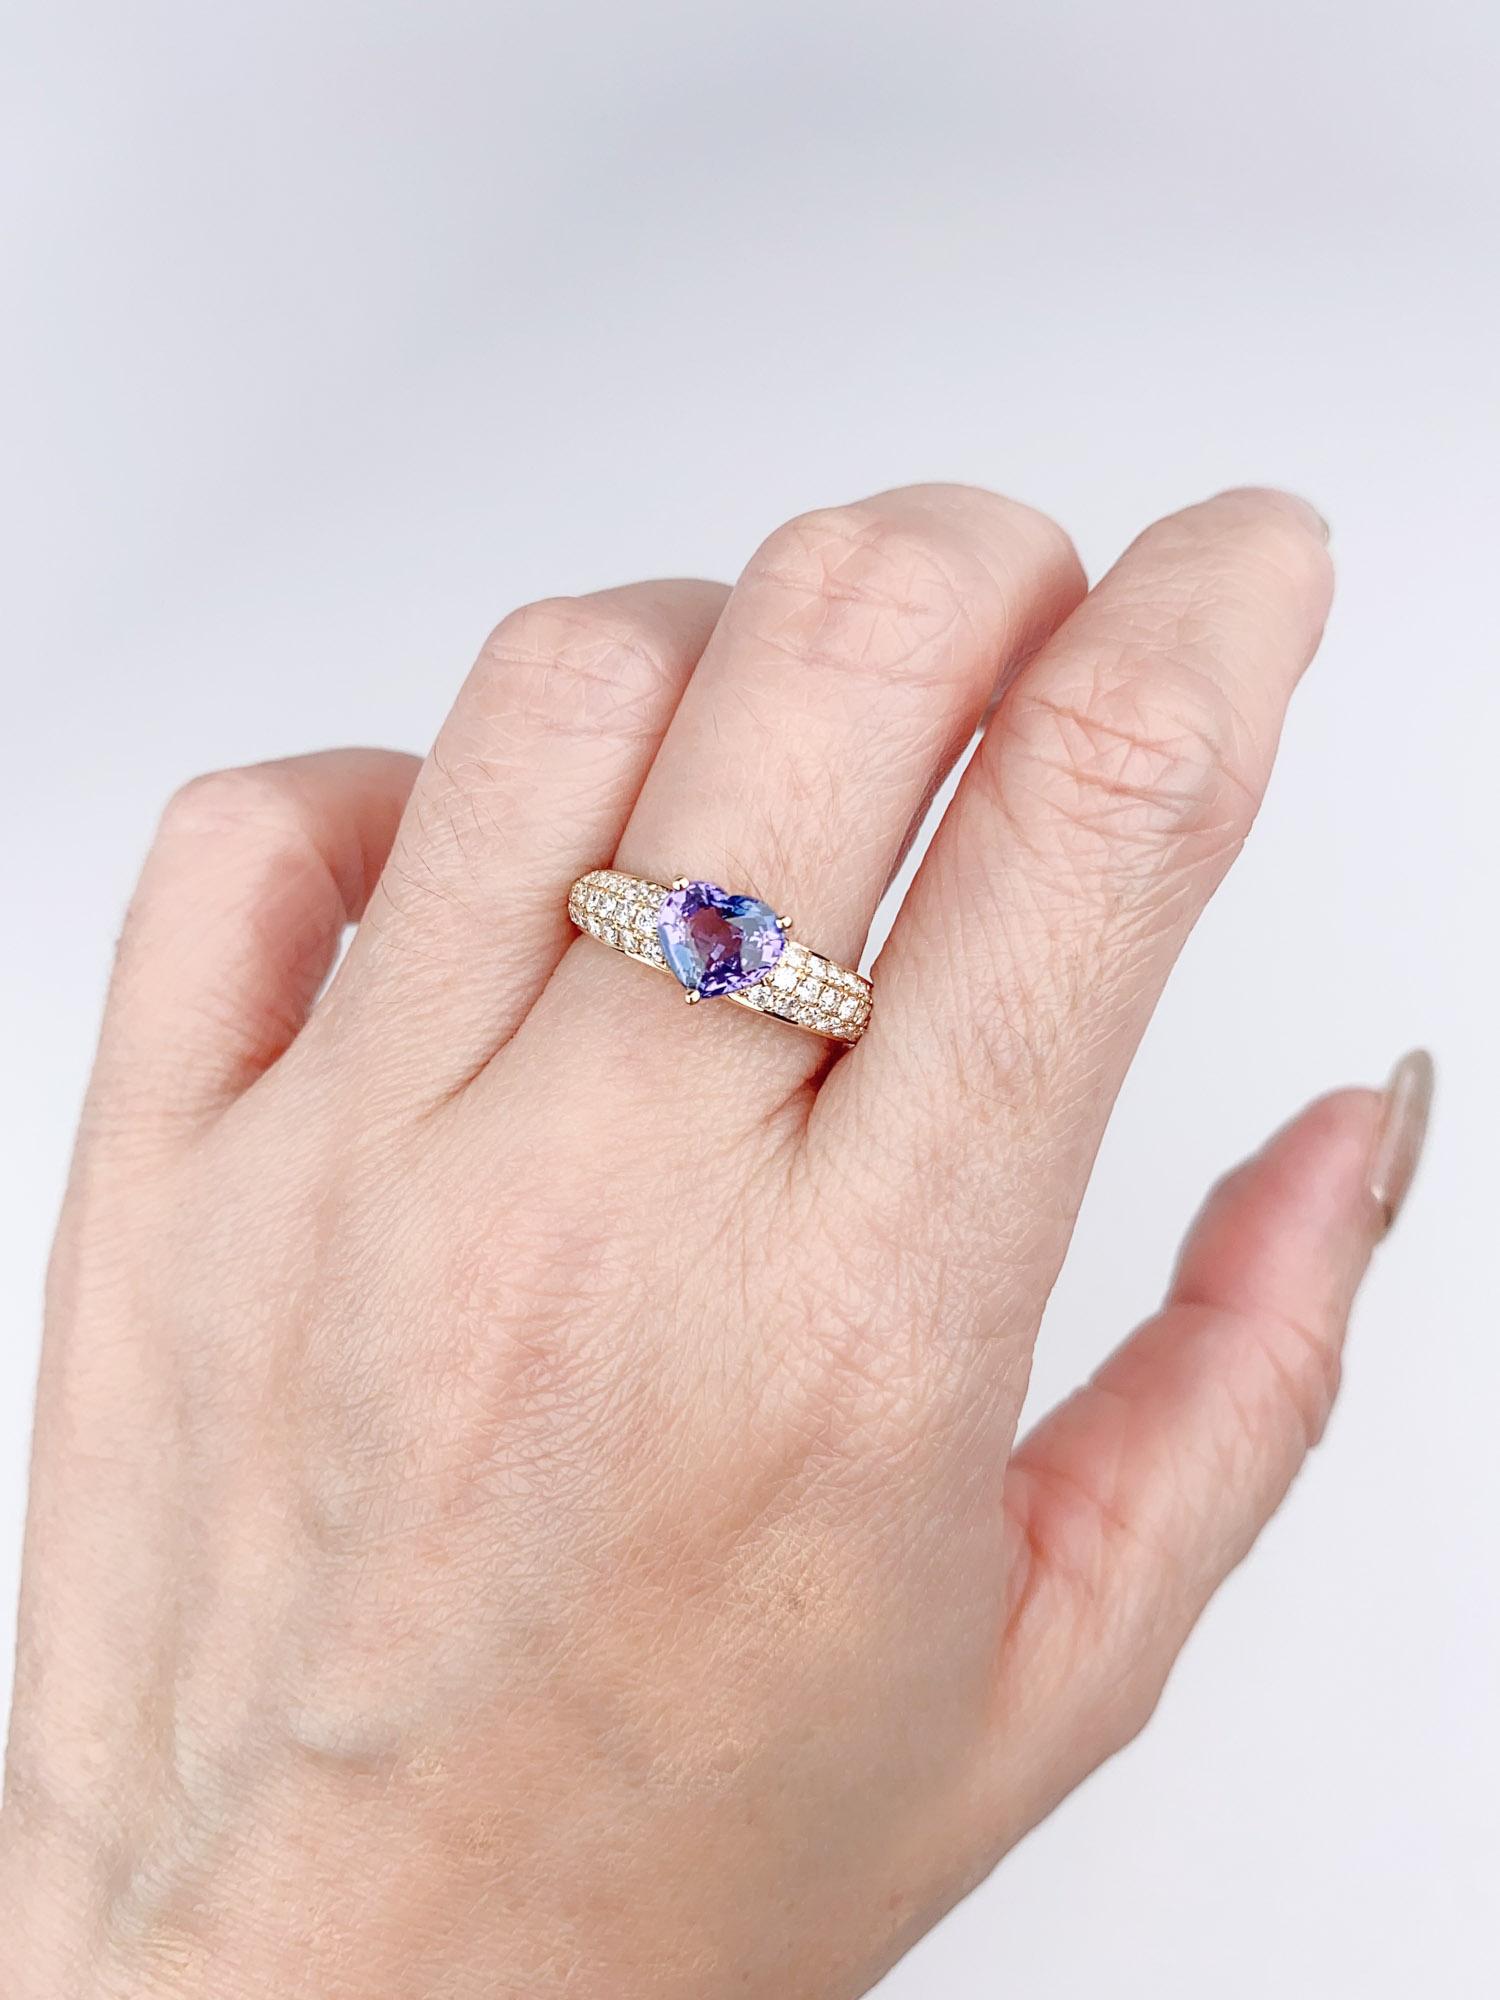 1.5ct Pinkish Purple Sapphire on Diamond Pave Engagement Ring 14K Gold R6499 For Sale 2